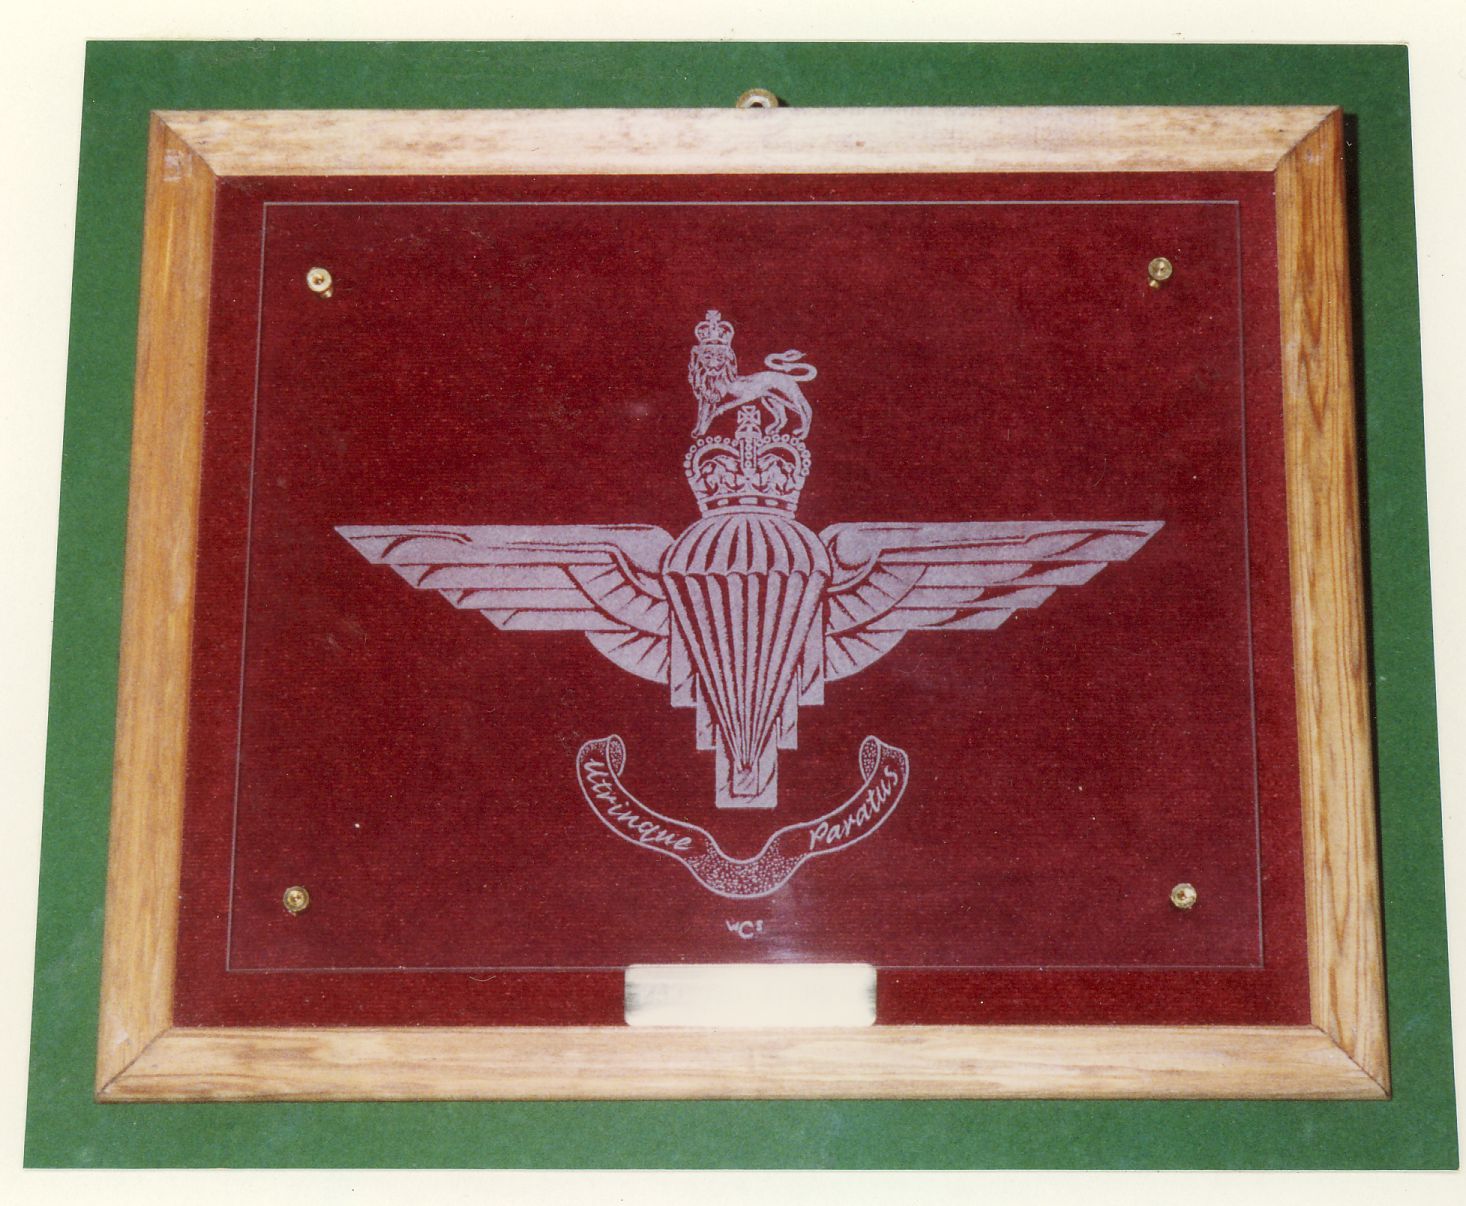 An engraving of the badge of the Parachute Regiment. On this occasion it is mounted above a maroon velvet background.